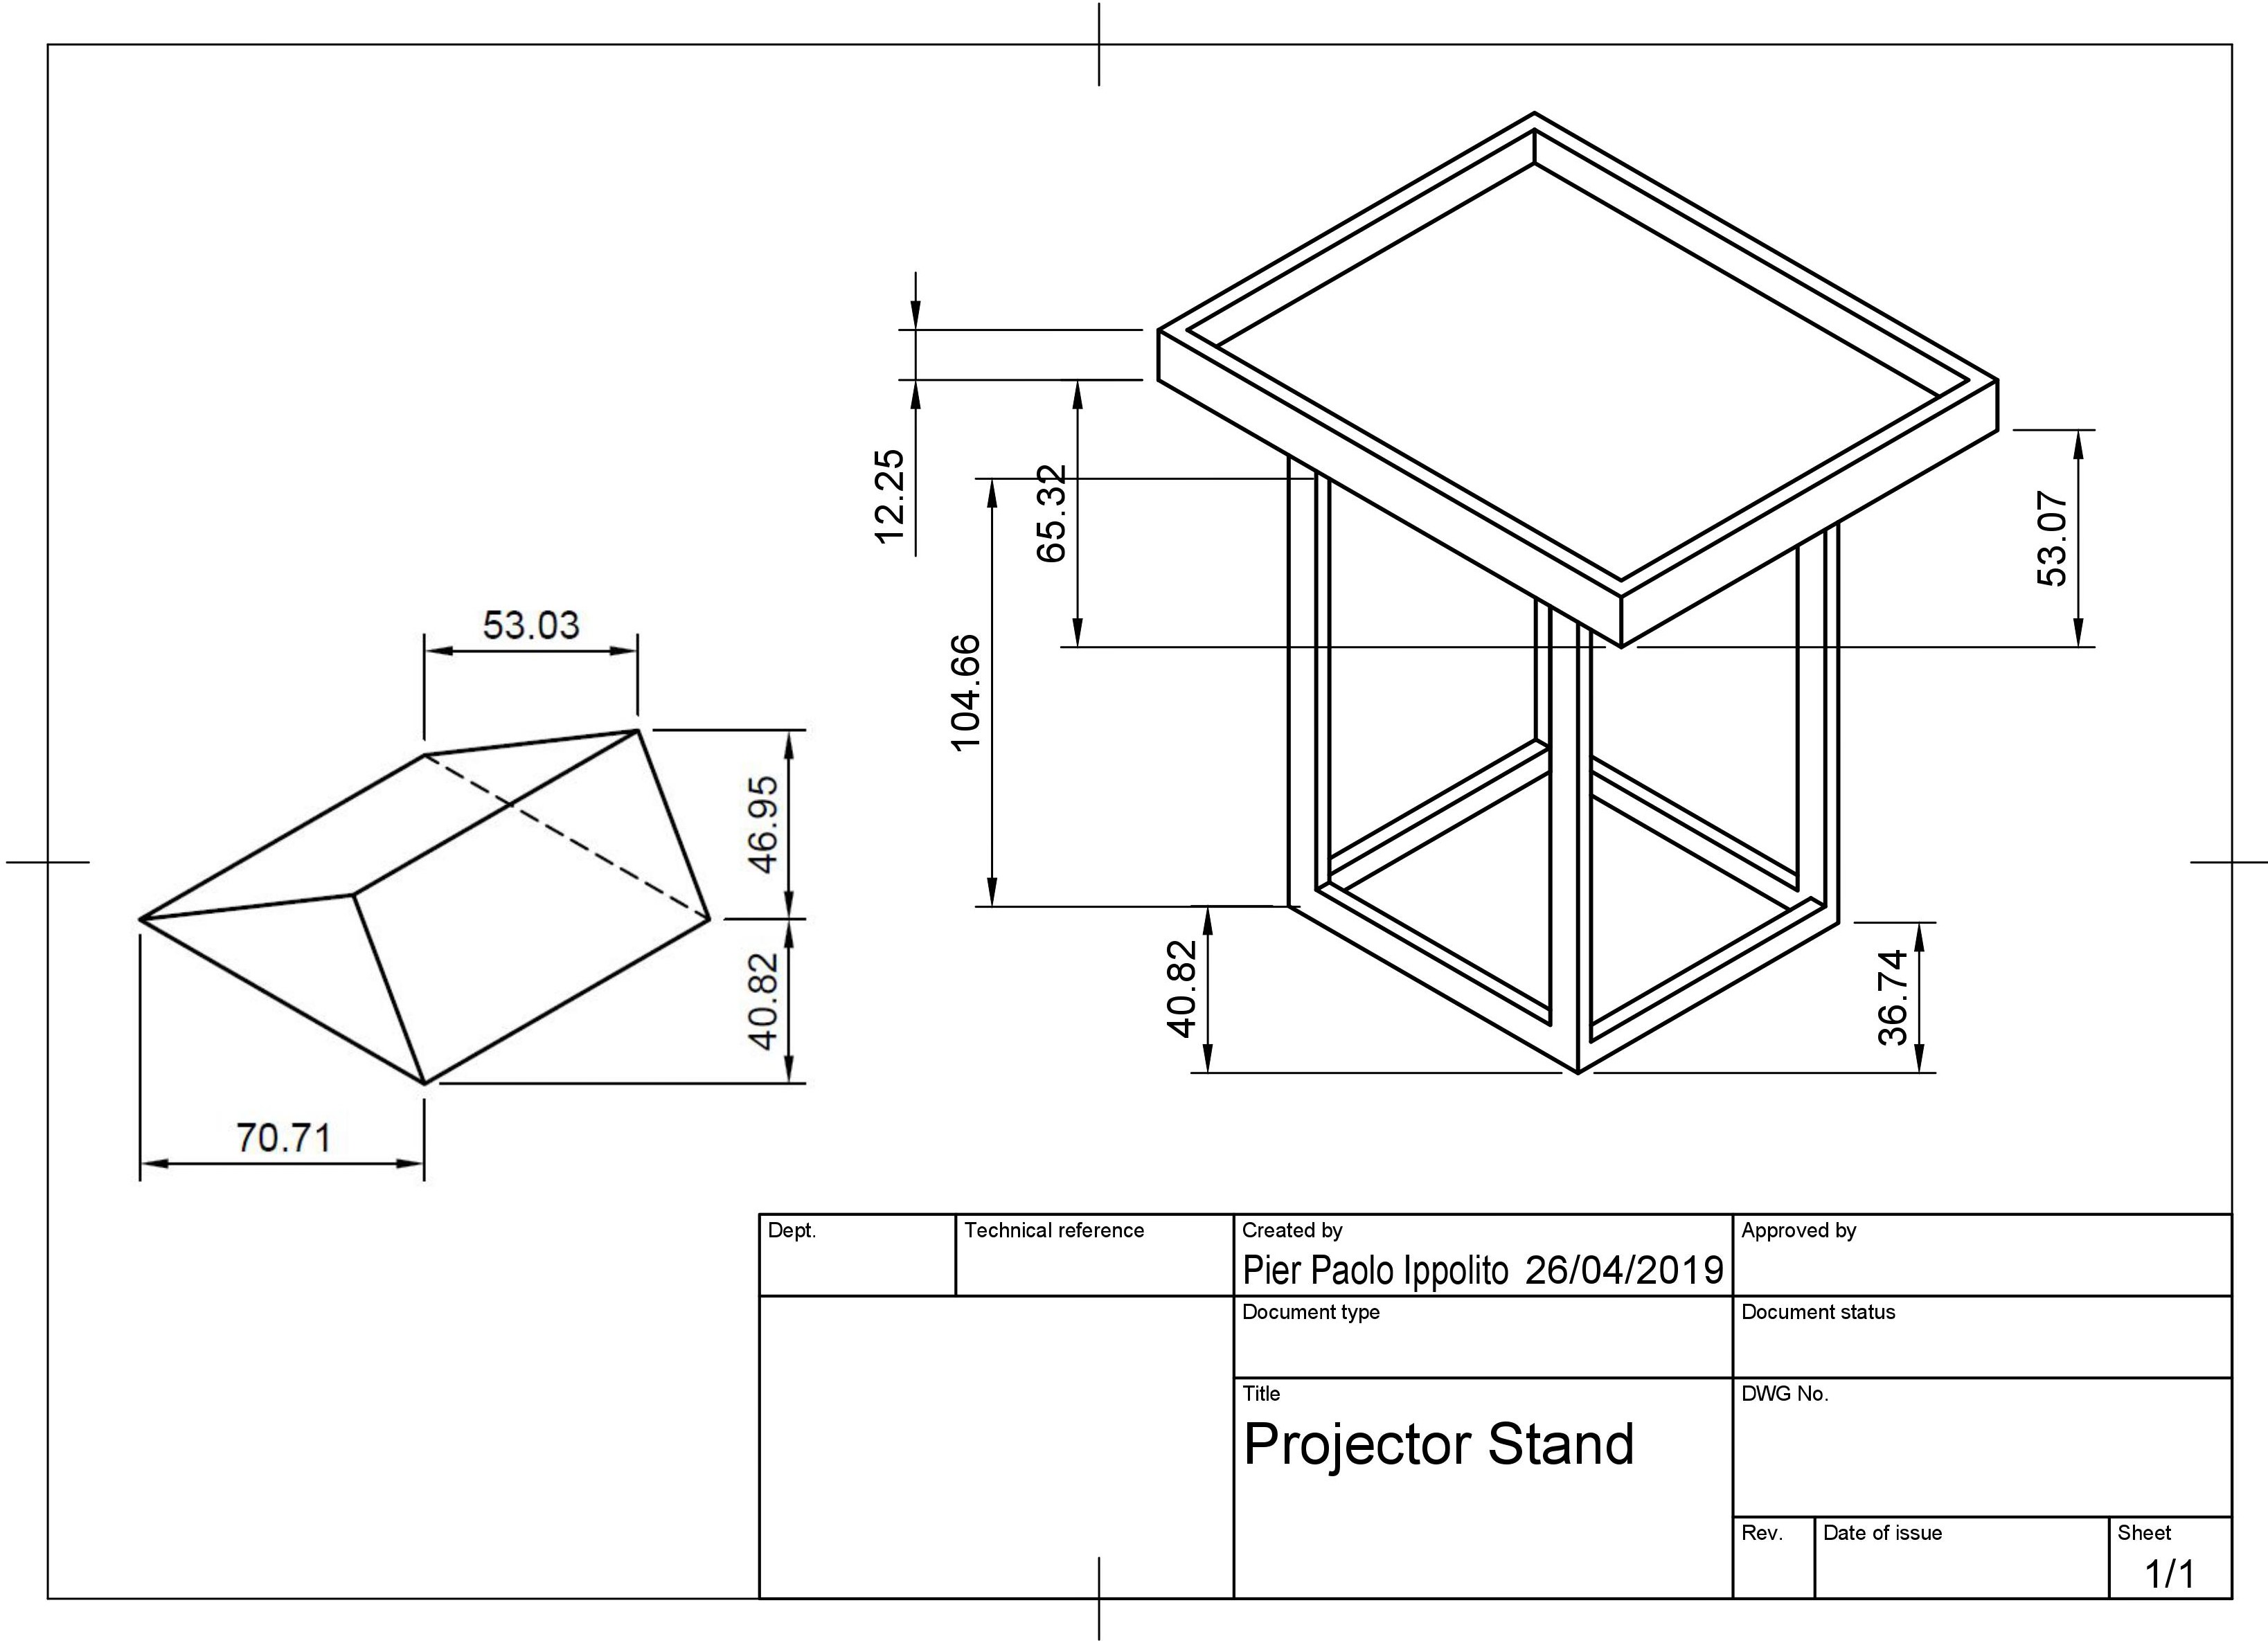 Projector stand design made using Fusion
360